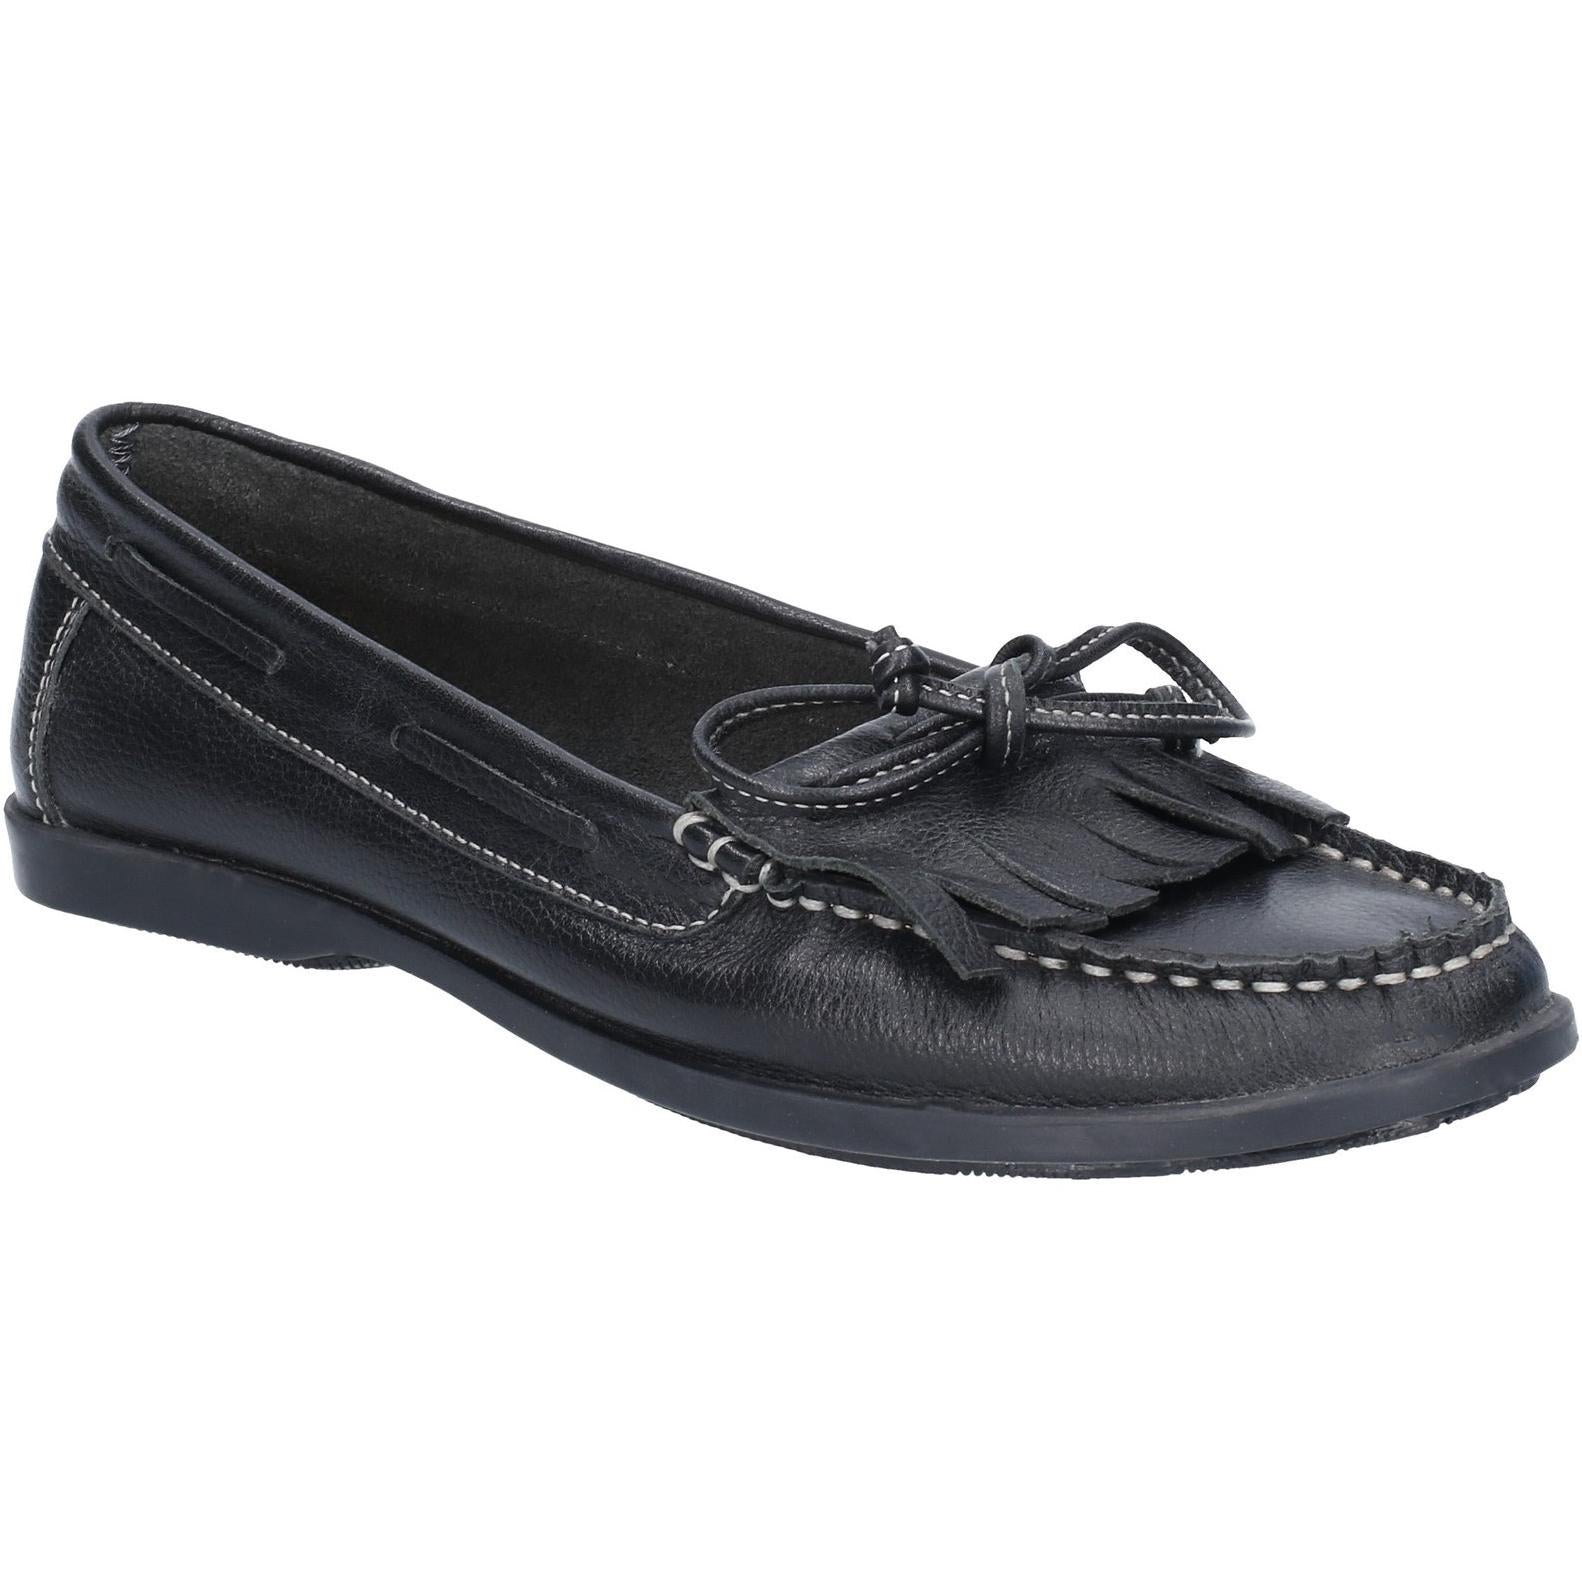 Hush Puppies Coco Moccassin Slip On Shoe